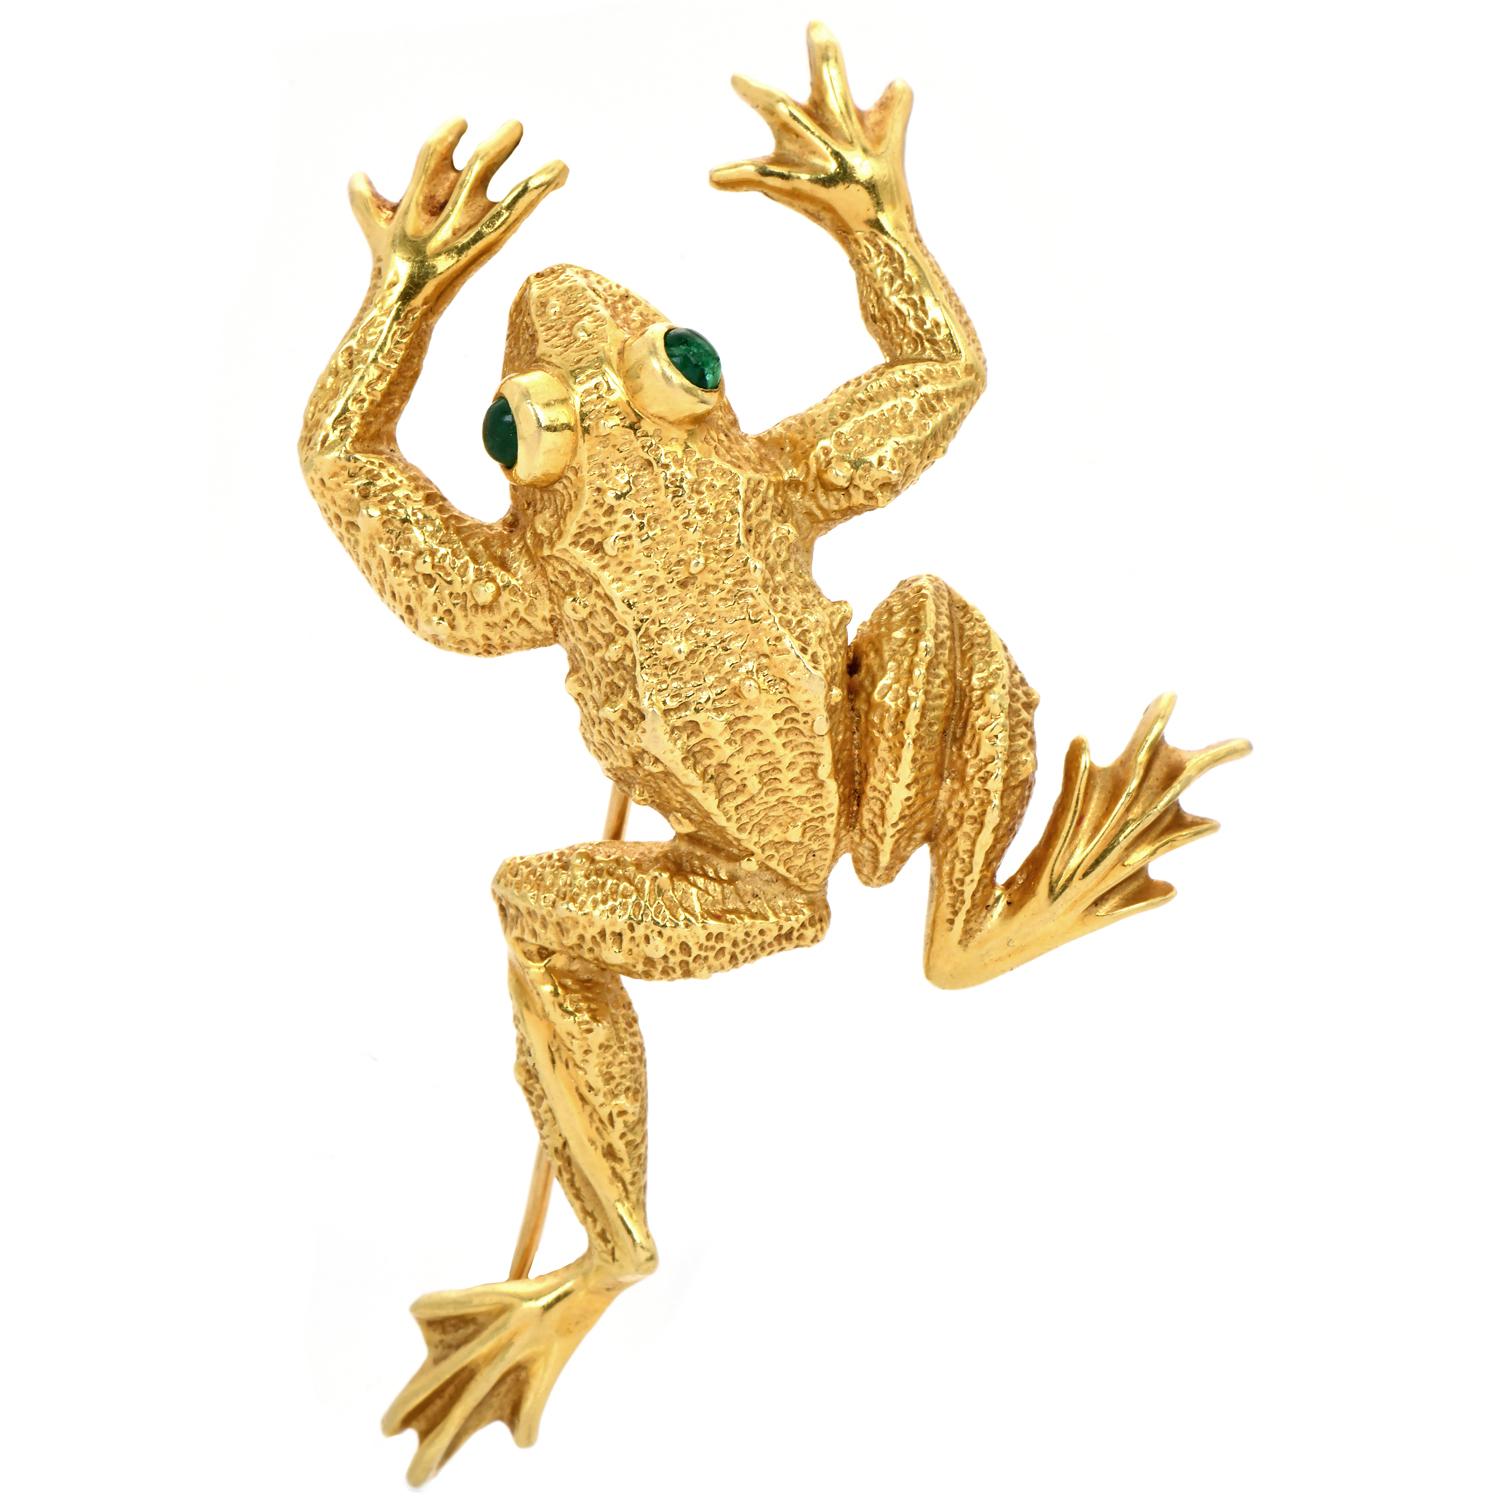 This frog-inspired brooch is from the Famous American designer Kurt Wyne is for nature lovers.

A vintage piece from 1969, crafted in solid 18K Yellow gold with a textured finish.

The eyes are made by (2) genuine cabochon round-cut, bezel-set,